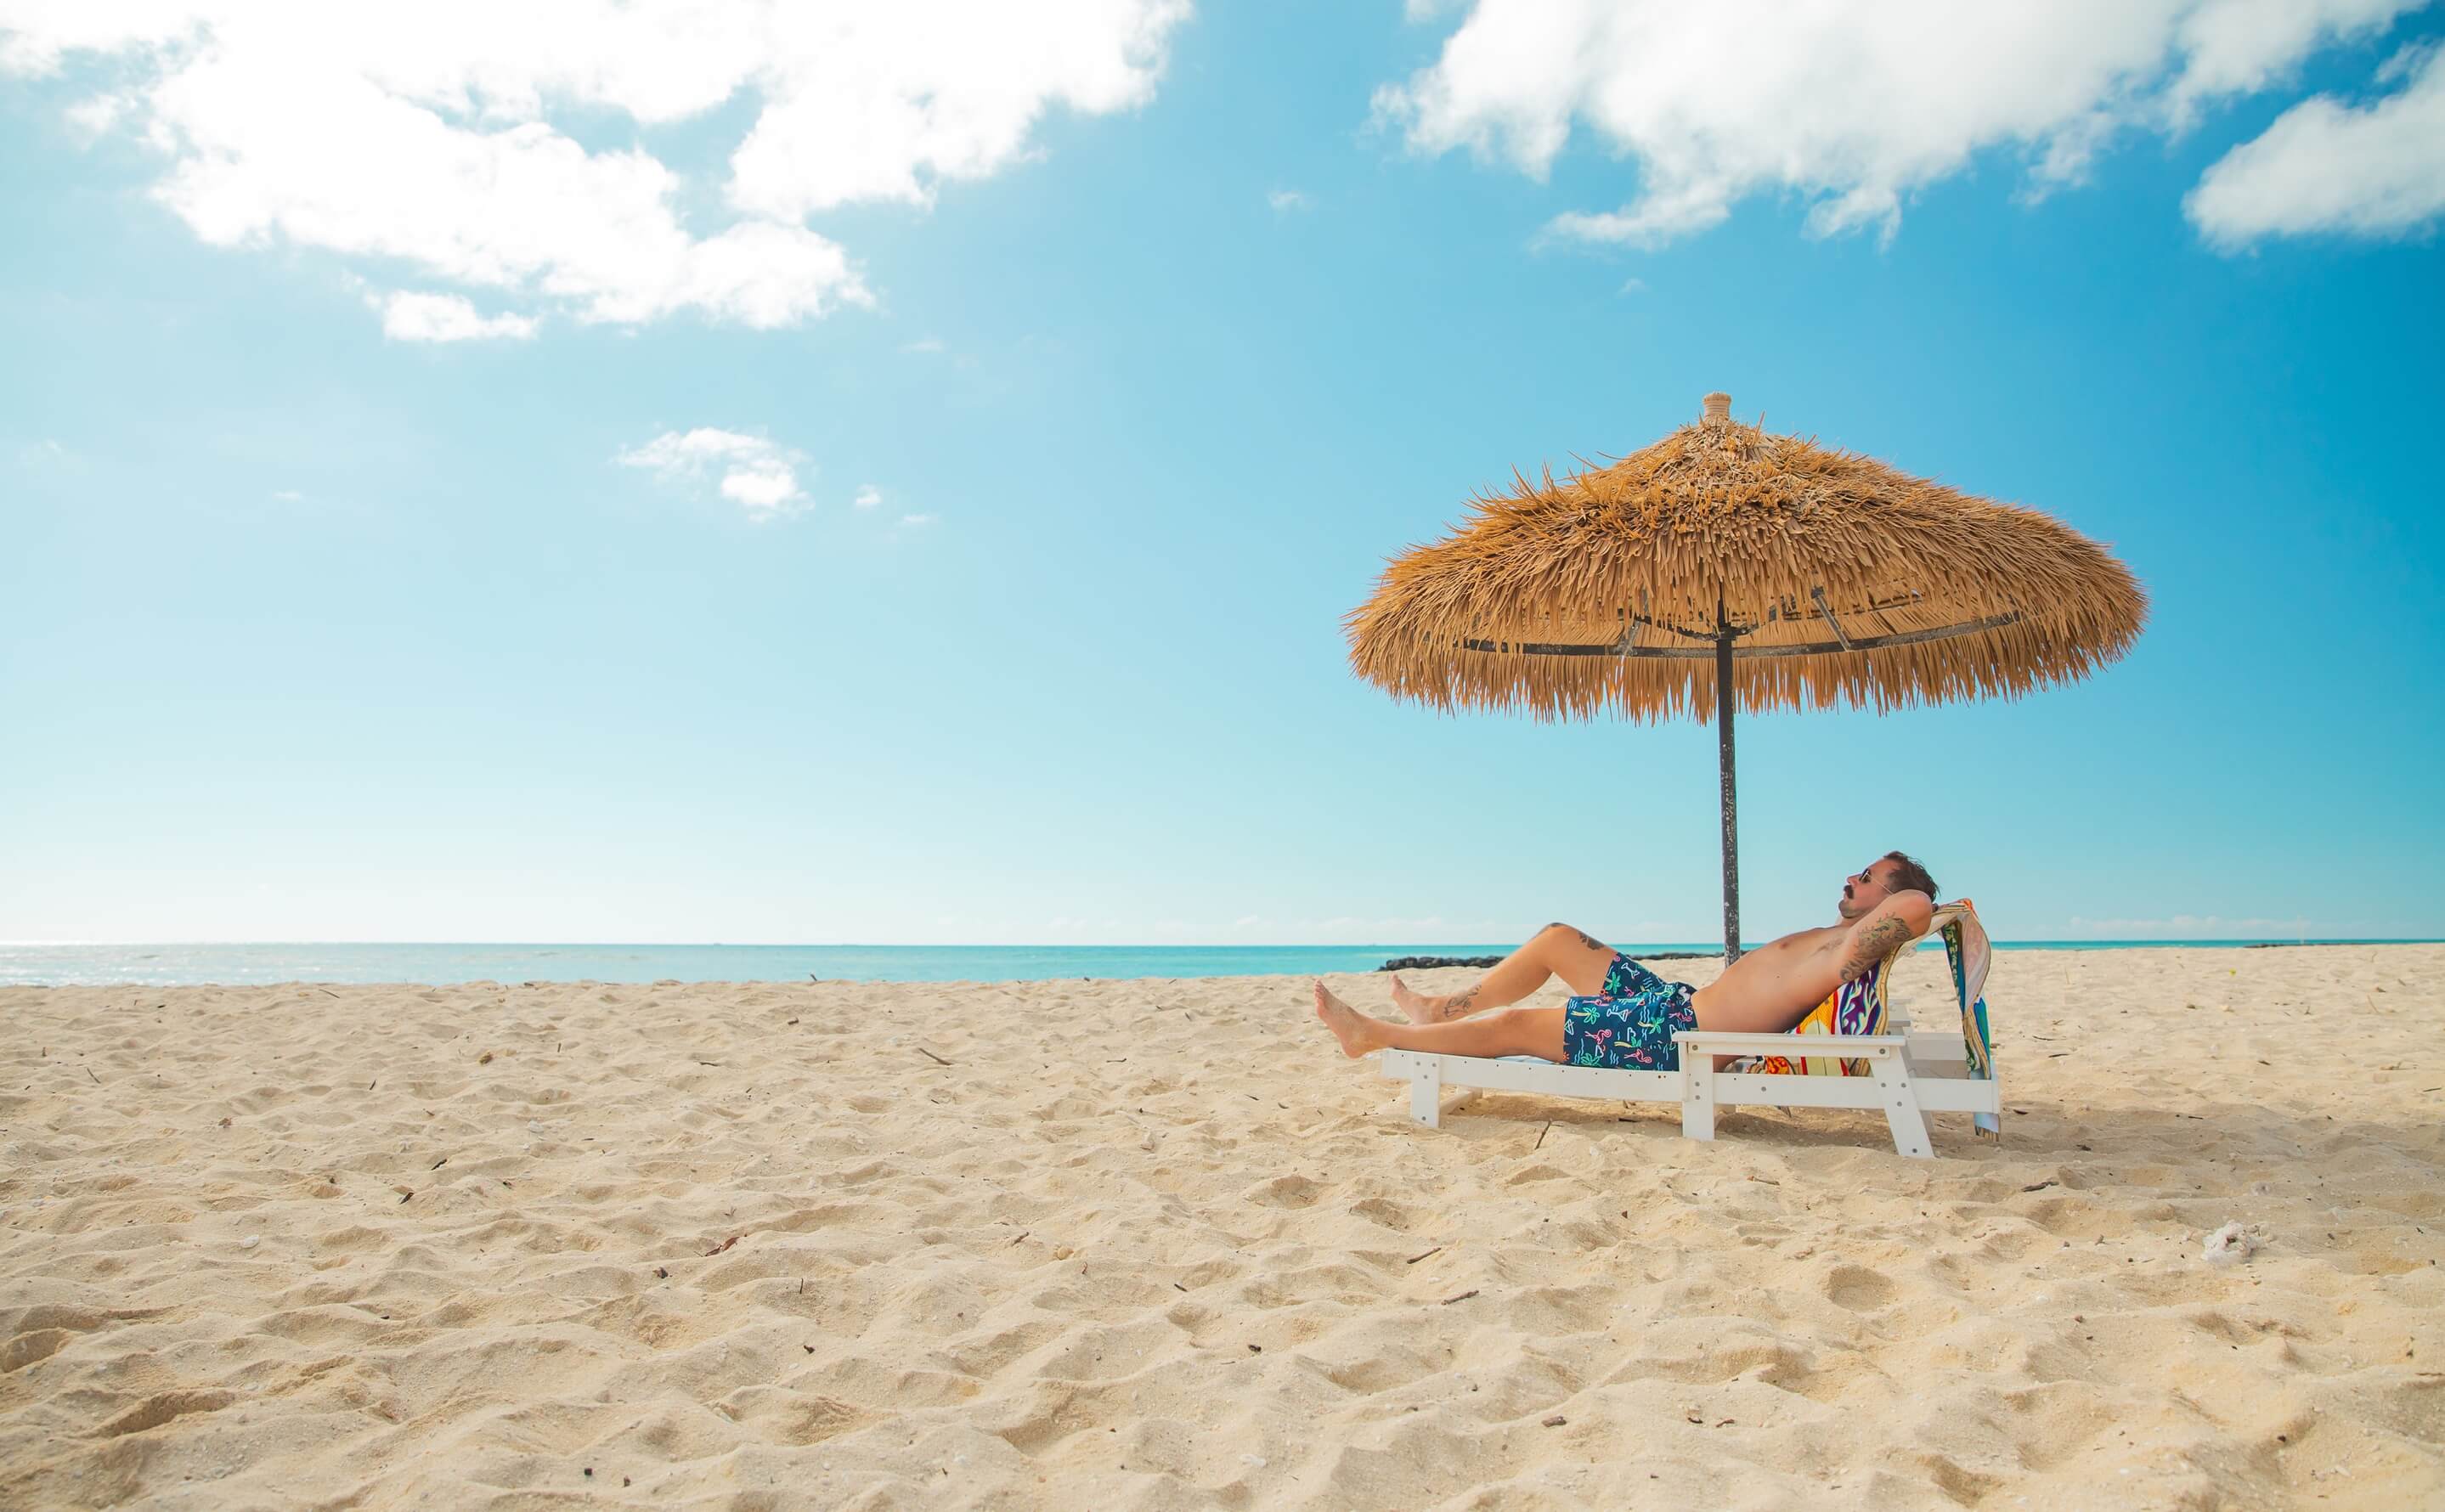 A man lounges in a beach chair under an umbrella. He’s wearing bright, floral printed Chubbies.